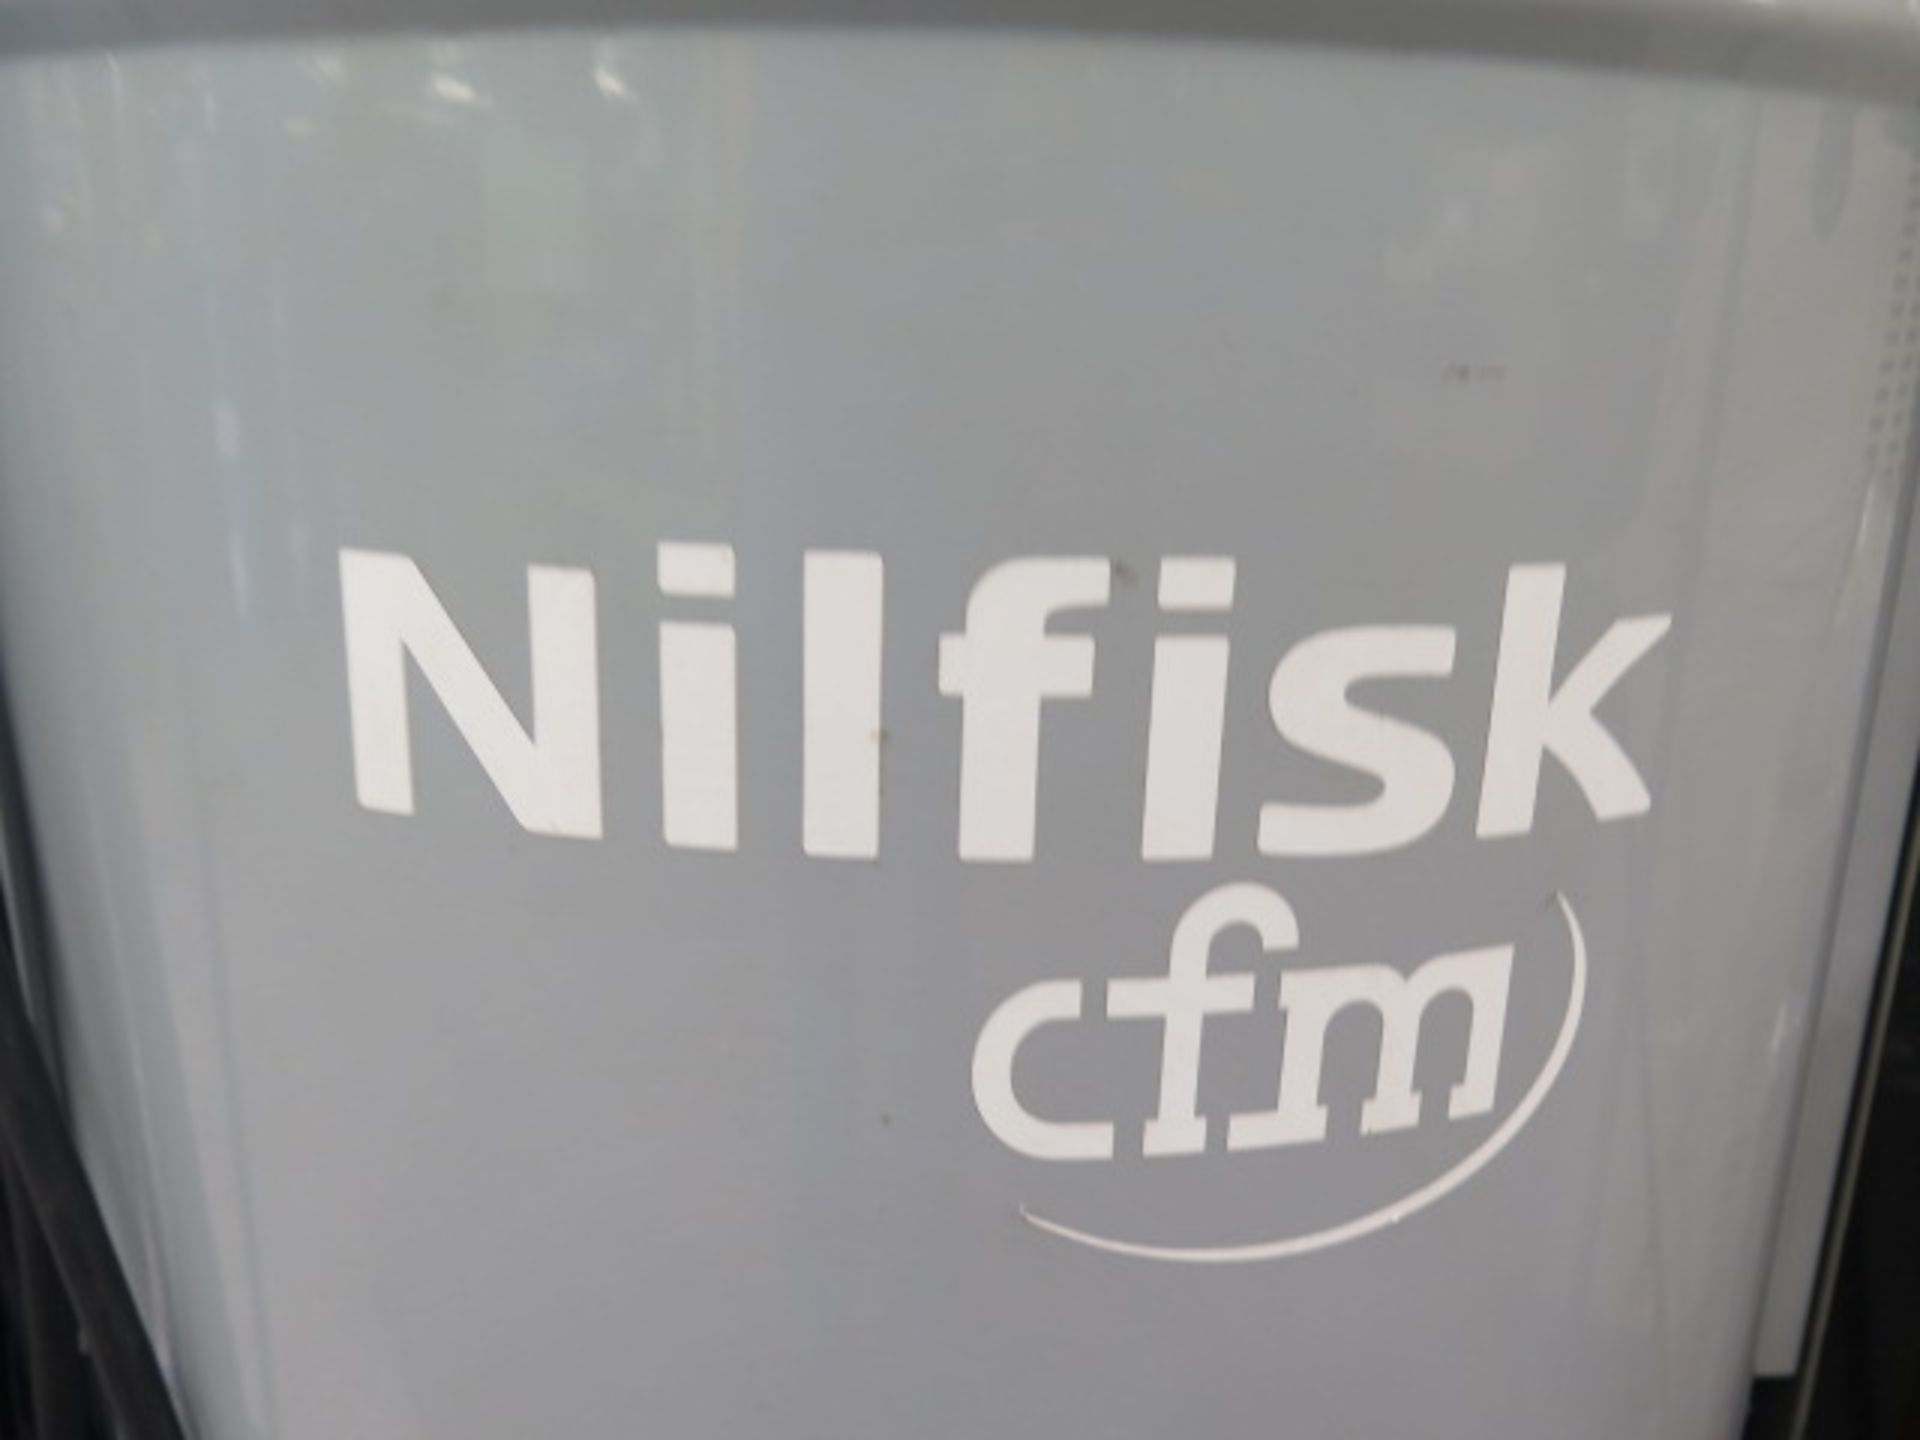 Nilfisk CFM Type ECO-10613 Industrial Vacuum s/n 16AI177 (SOLD AS-IS - NO WARRANTY) - Image 7 of 8